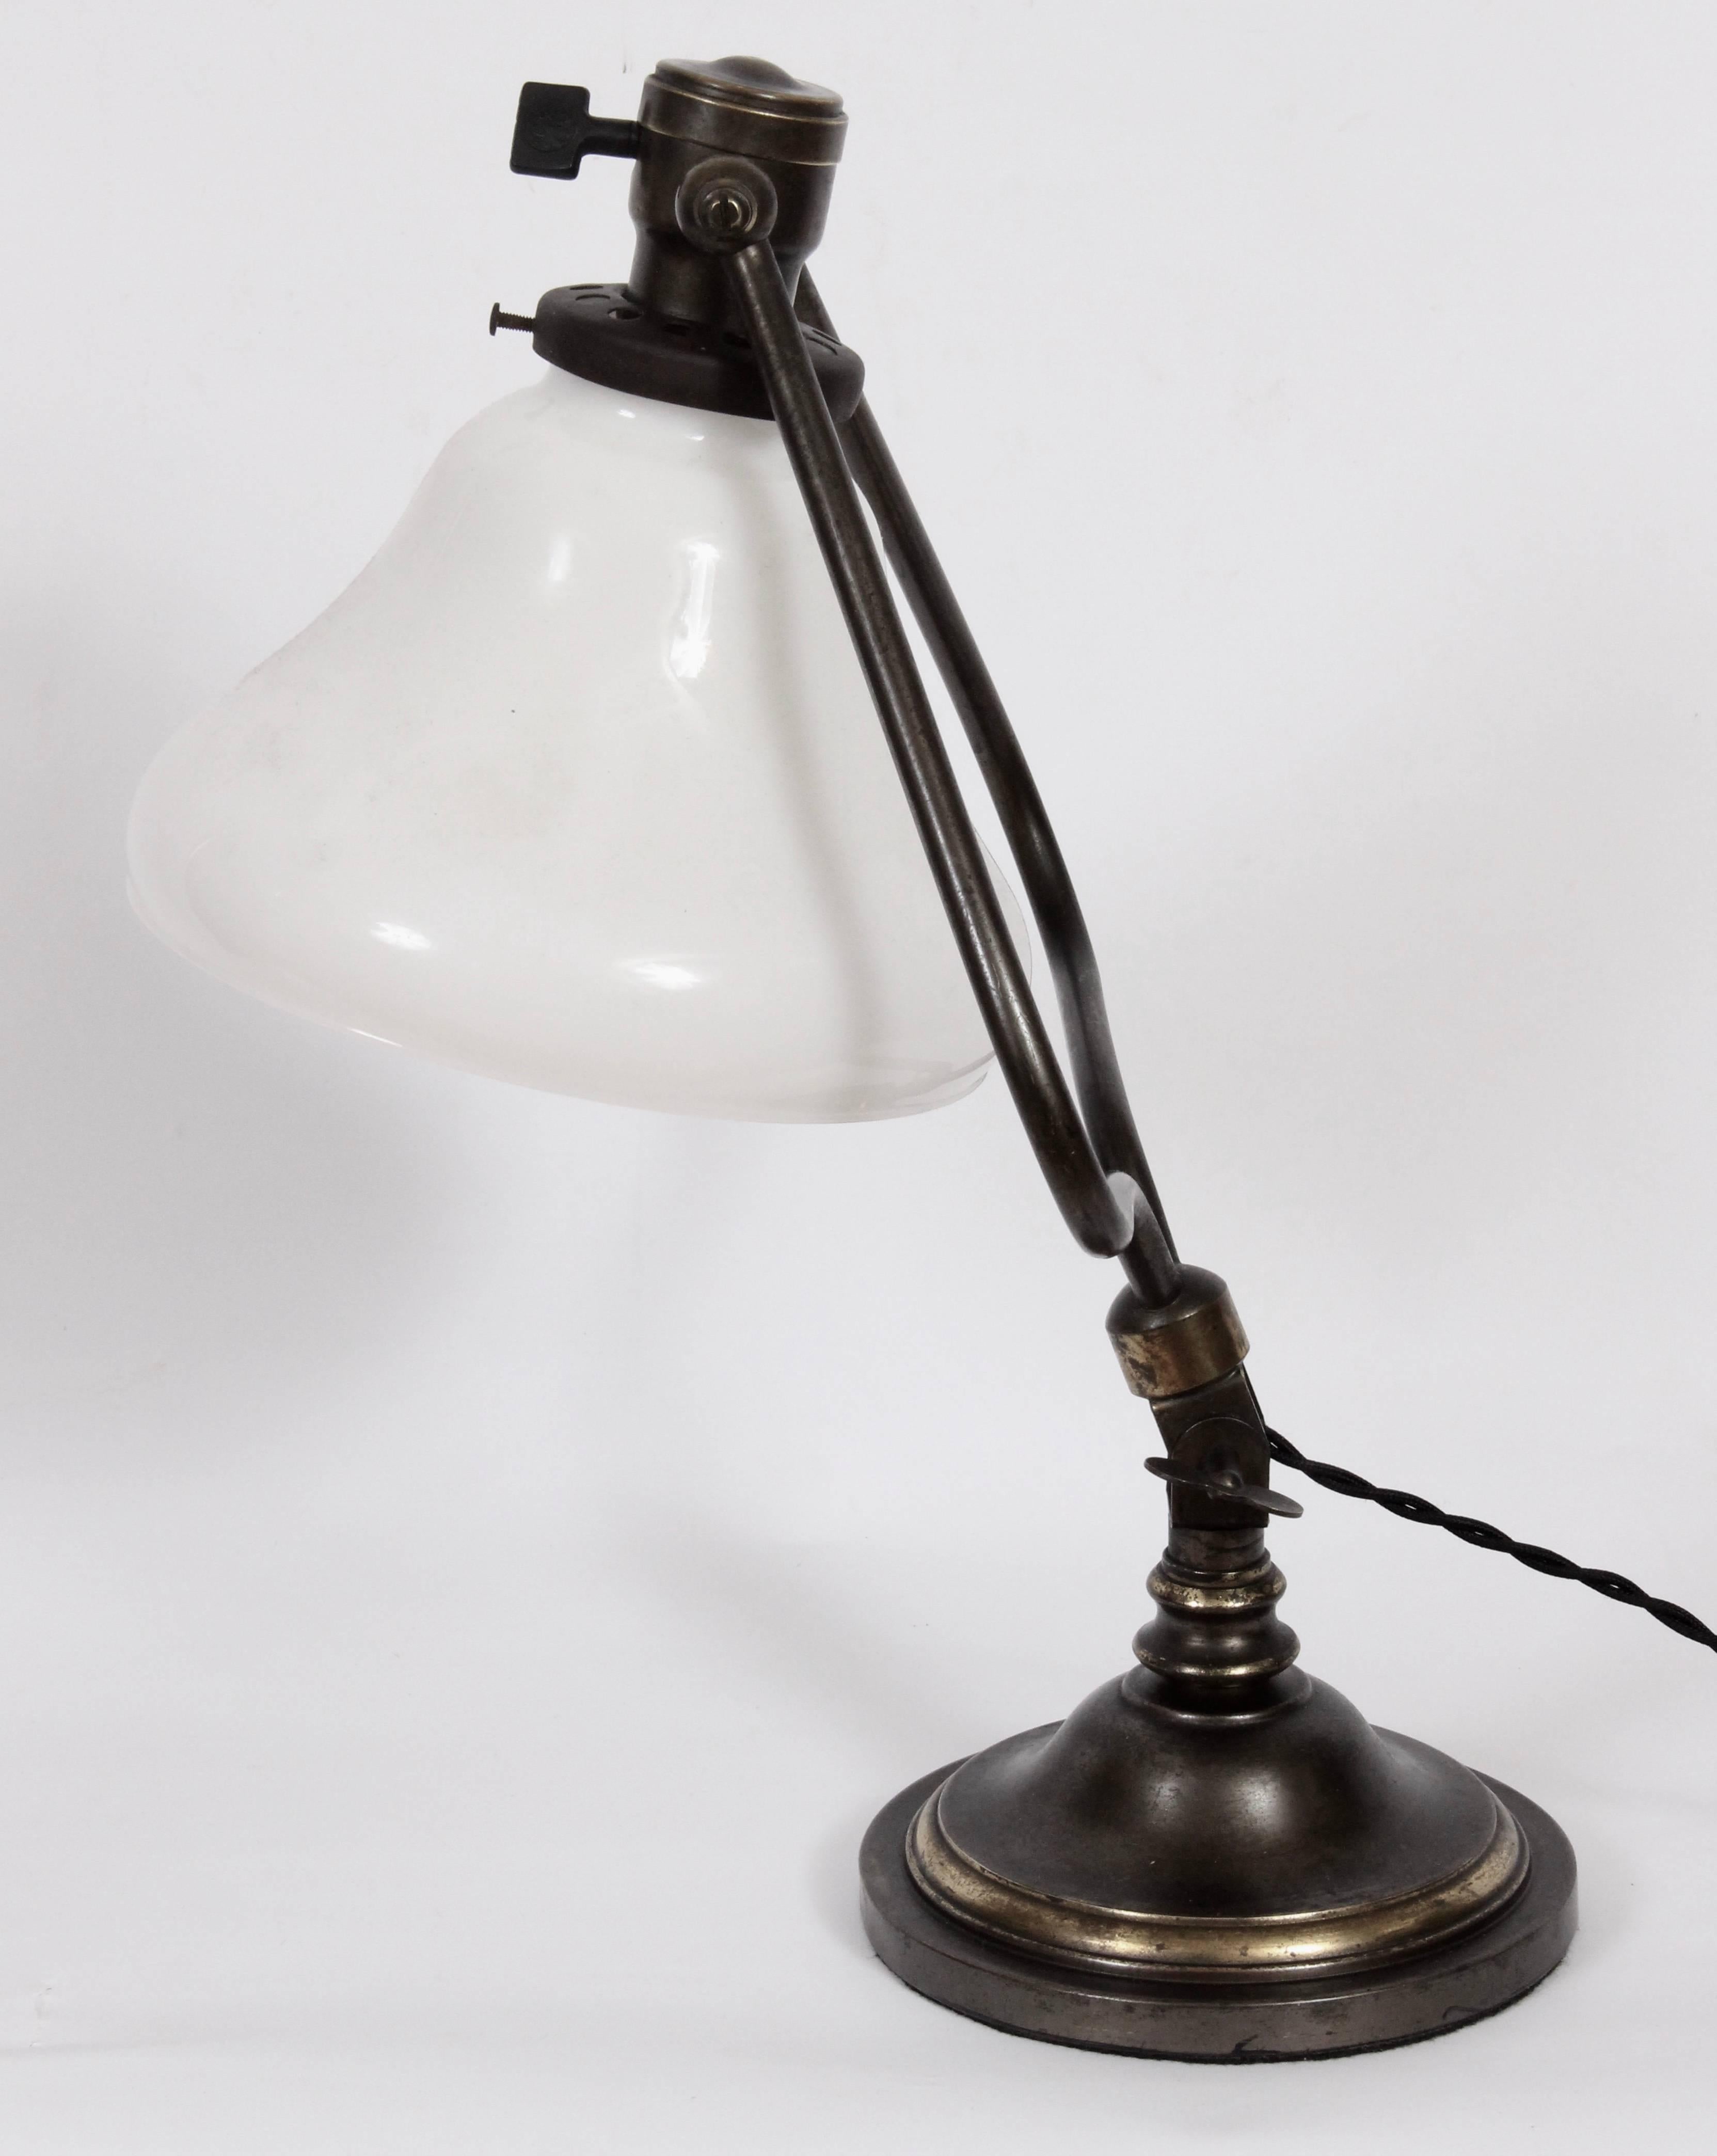 Early electric Edwardian tiffany style all brass harp table lamp with white milk glass bell shade attributed to Bradley and Hubbard, circa 1910. Featuring a patinated brass with bronze appearance with fully articulating shade which tilts and turns,